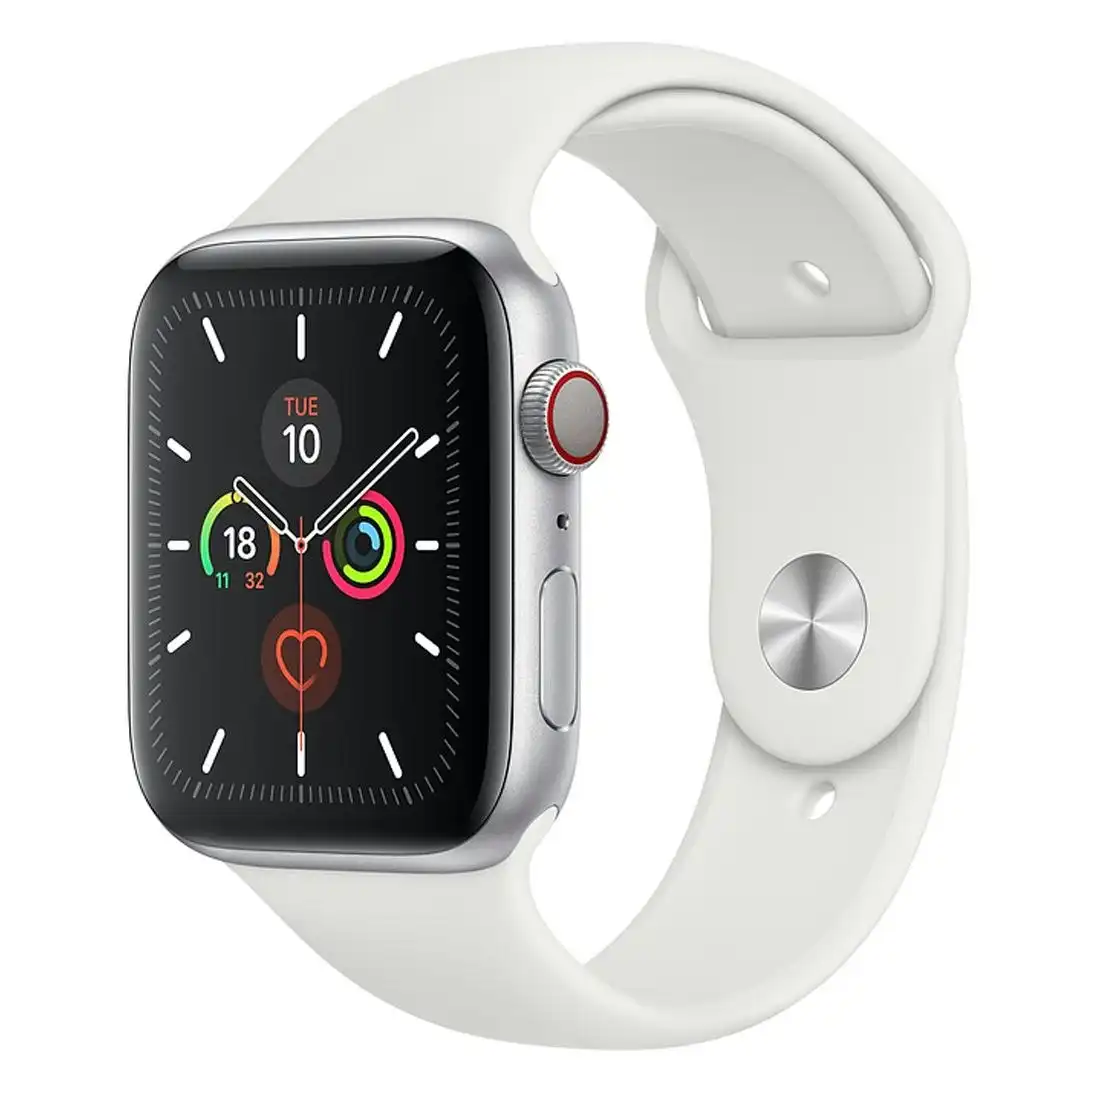 Apple Watch 44mm Series 5 Silver Alu Case w/ White Sport Band  (GPS+Cellular) [Refurbished] - As New